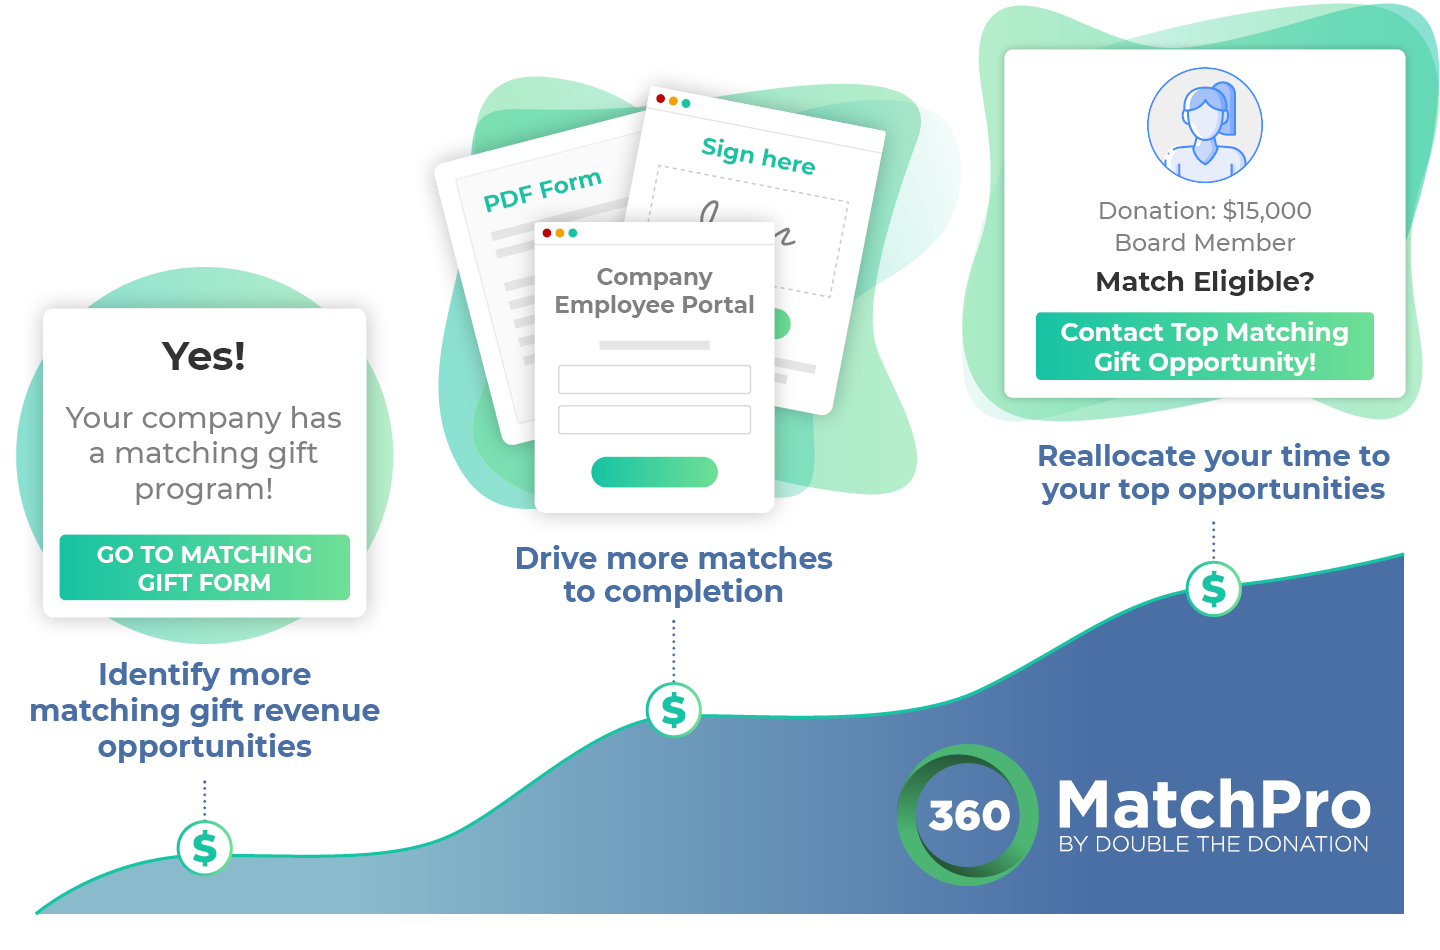 360MatchPro and Classy provide value to your nonprofit!